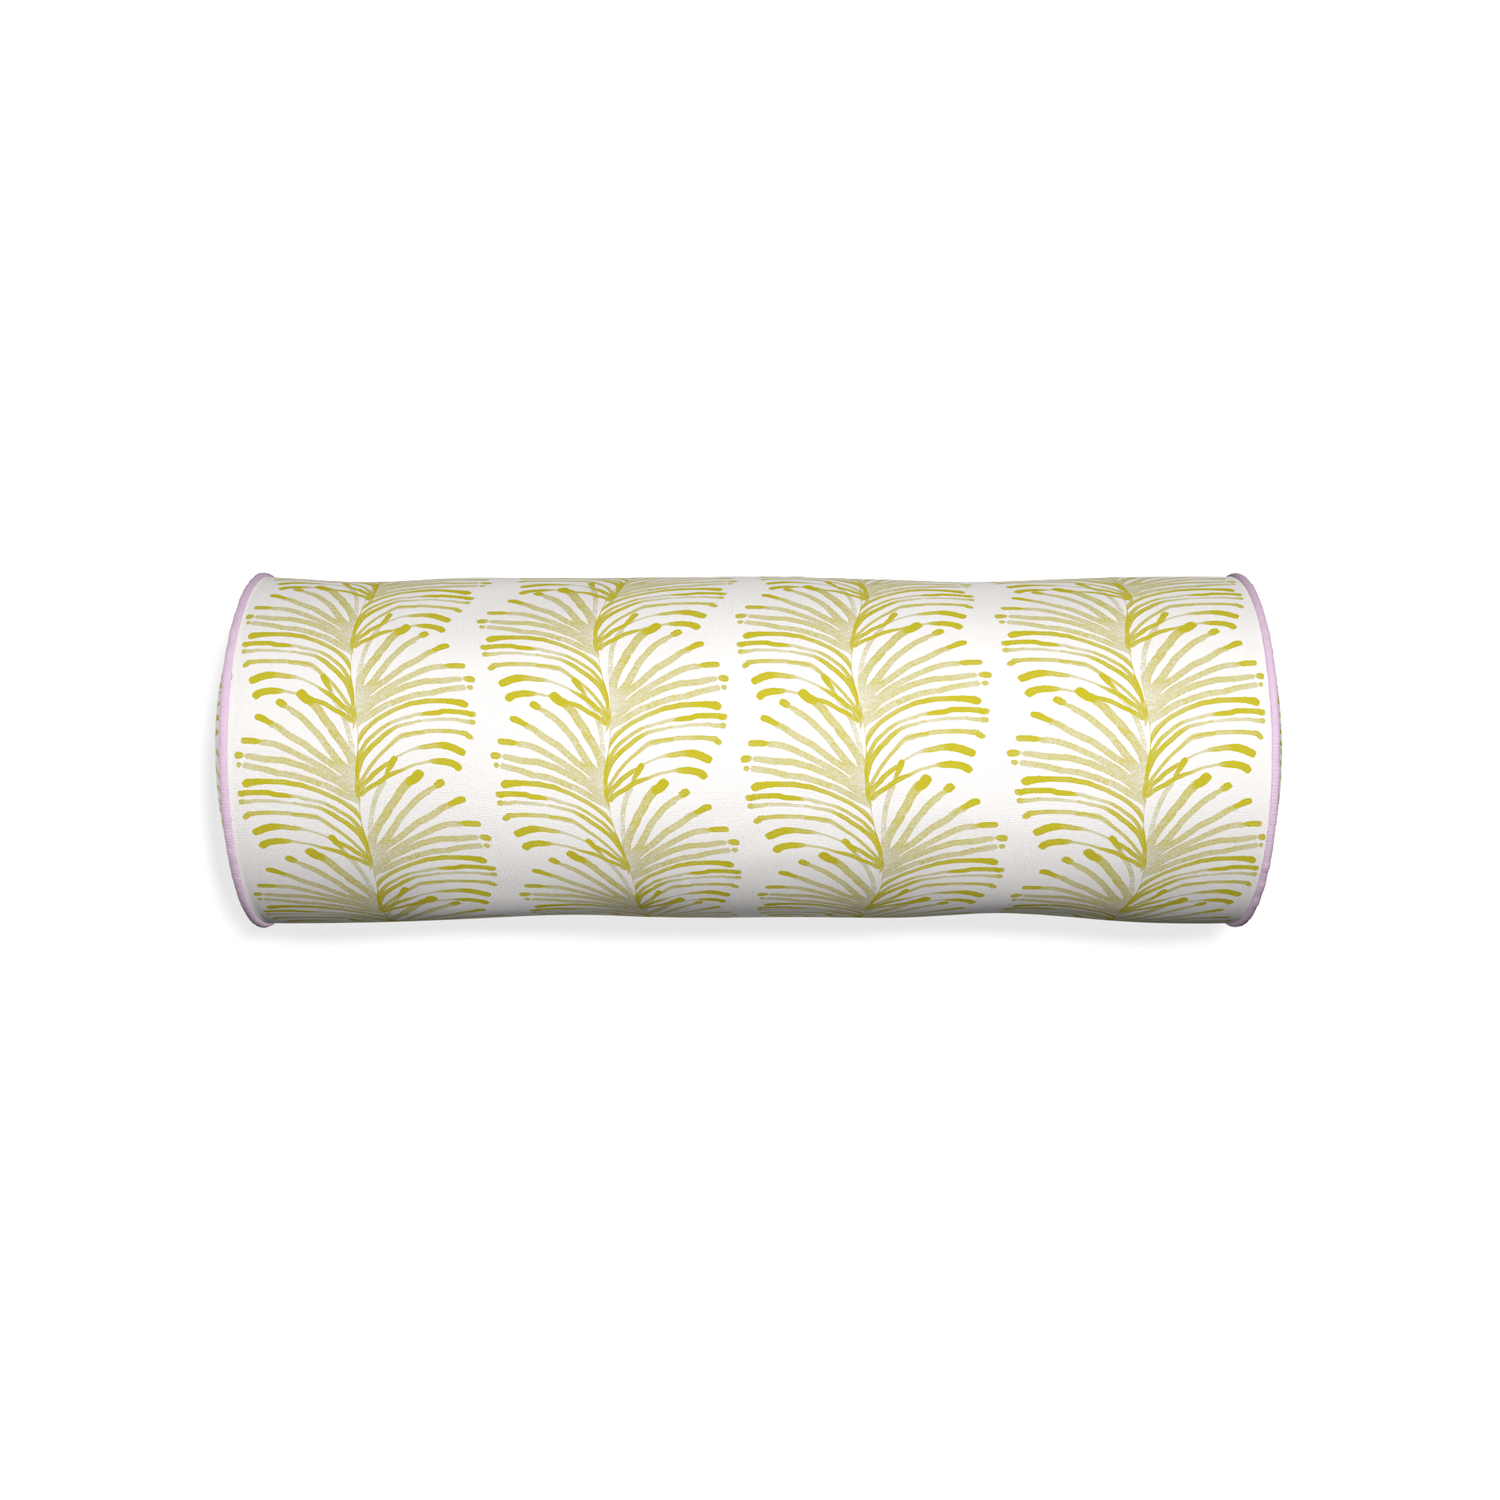 Bolster emma chartreuse custom yellow stripe chartreusepillow with l piping on white background